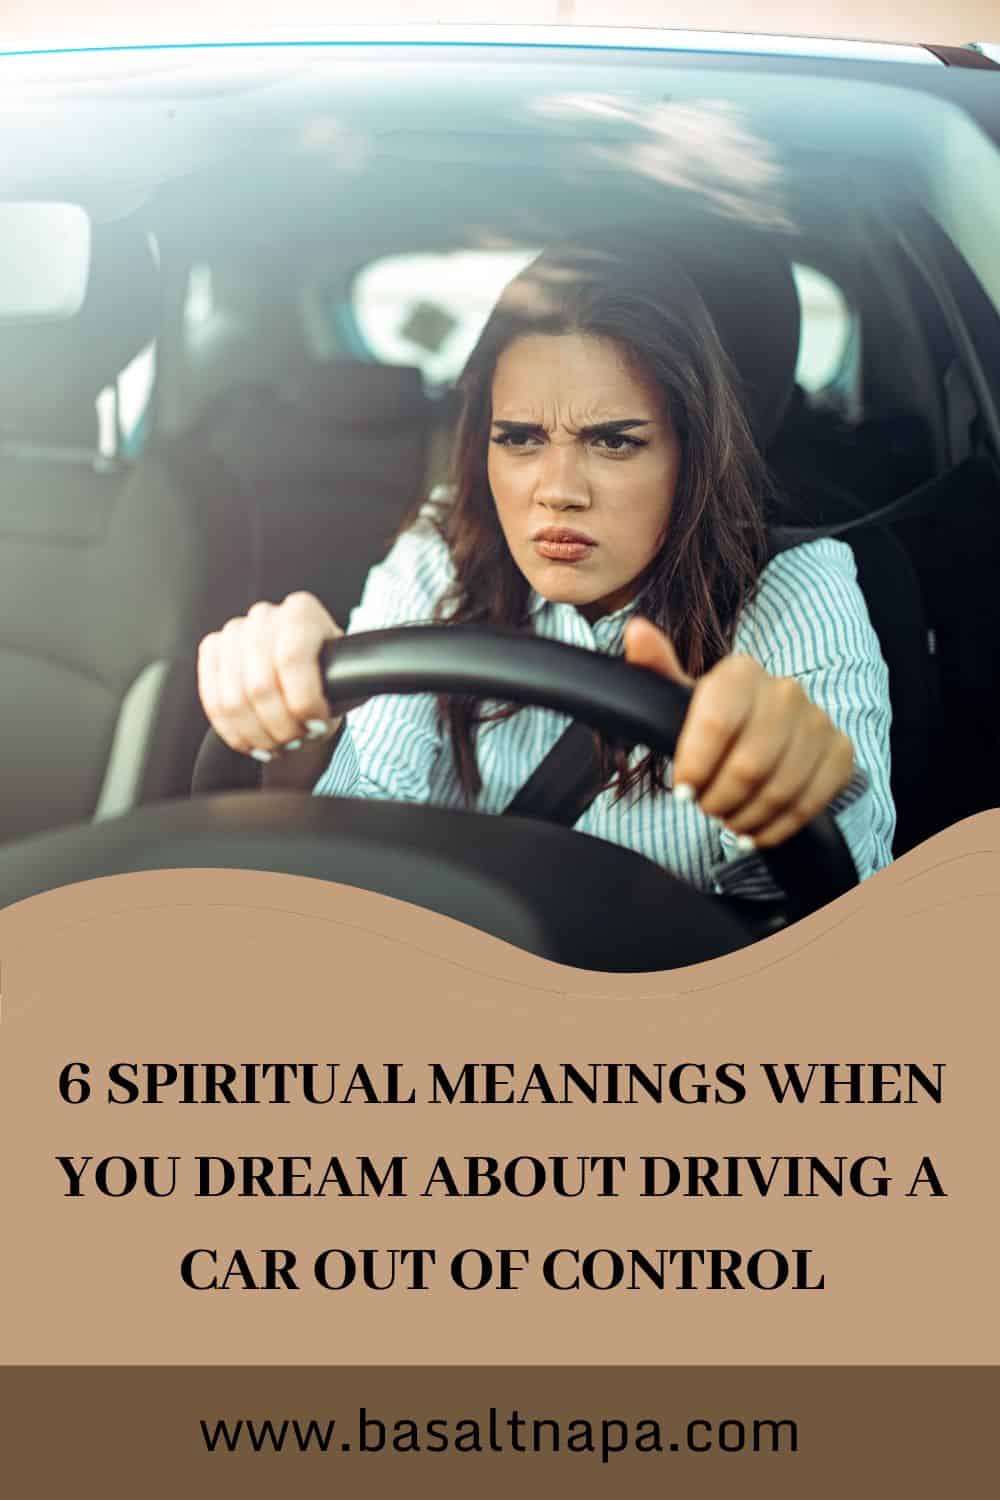 6 Meanings to dreams where your car goes out of control